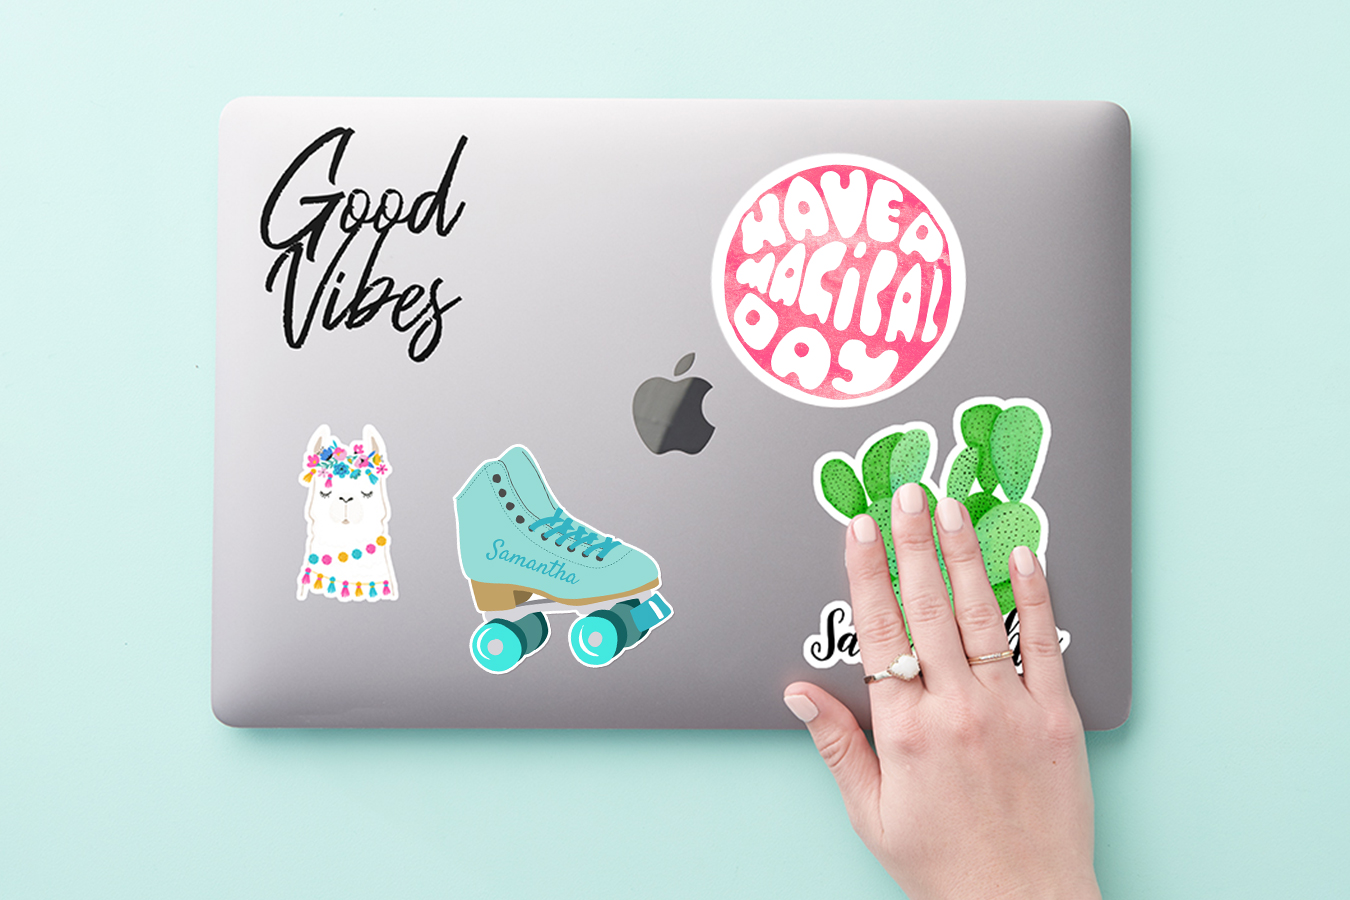 Laptop Sticker Ideas - How to Decorate Your Laptop with Stickers